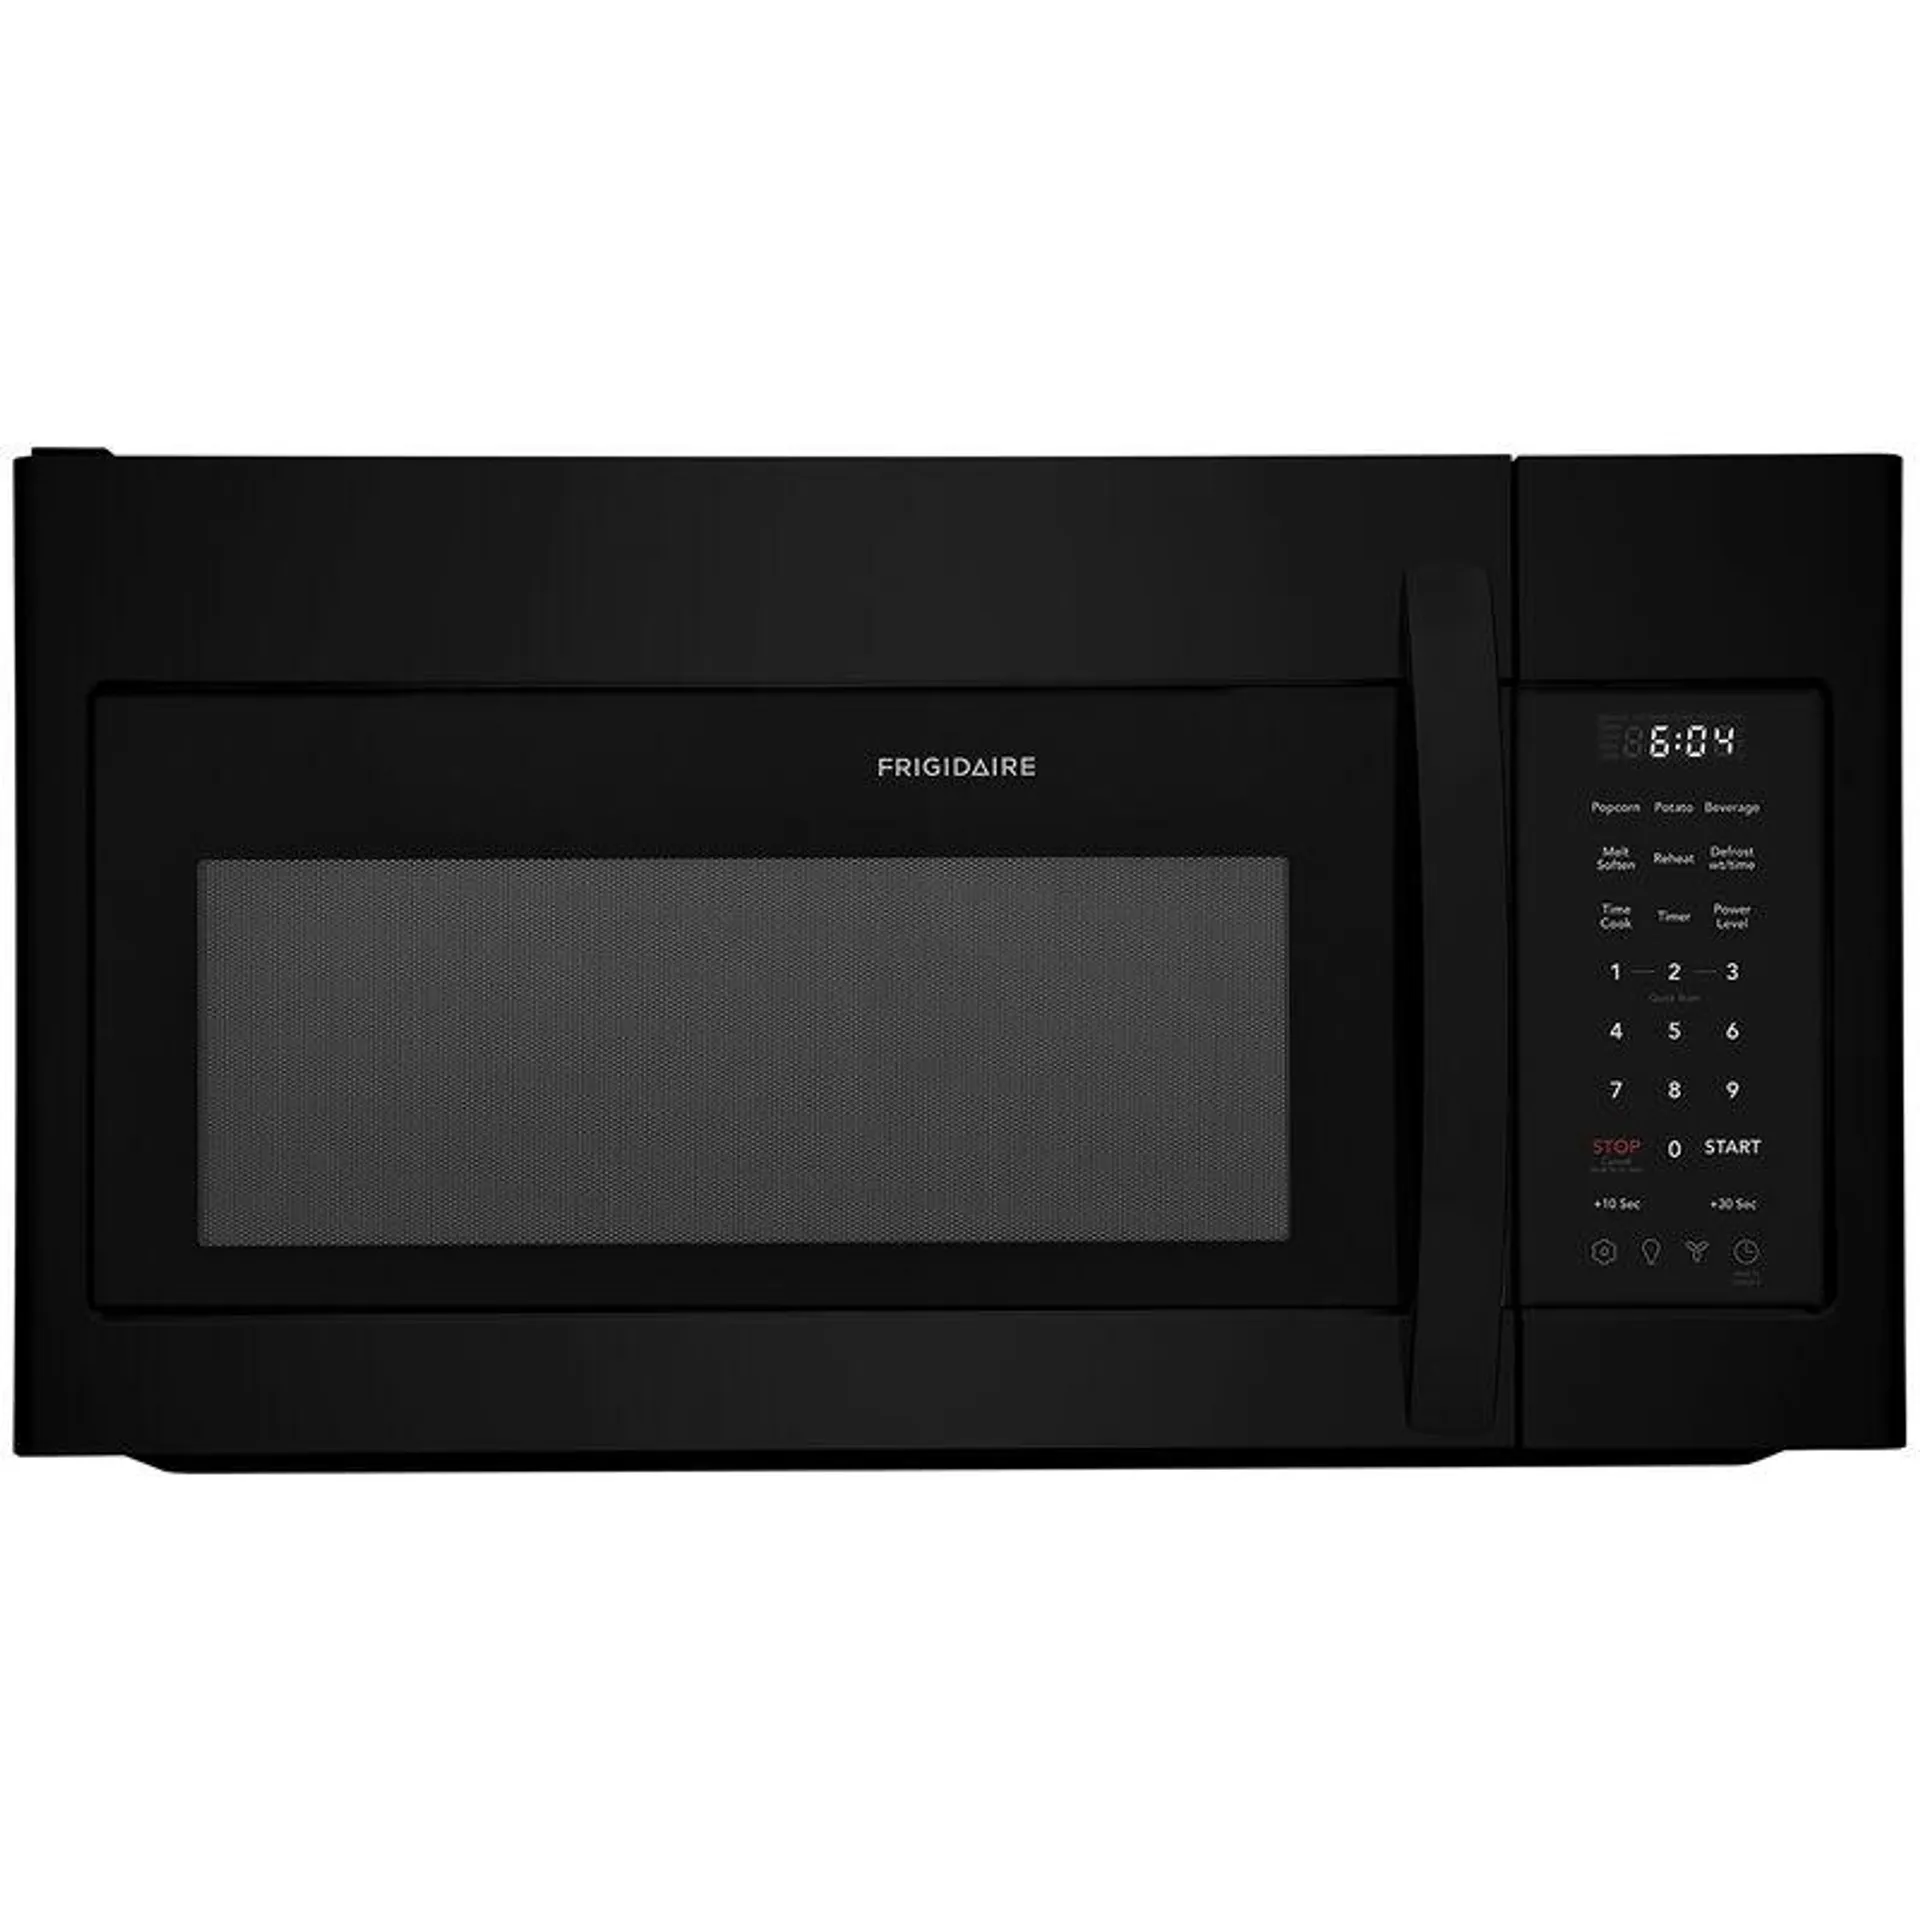 Frigidaire 30 in. 1.8 cu. ft. Over-the-Range Microwave with 10 Power Levels & 300 CFM - Black